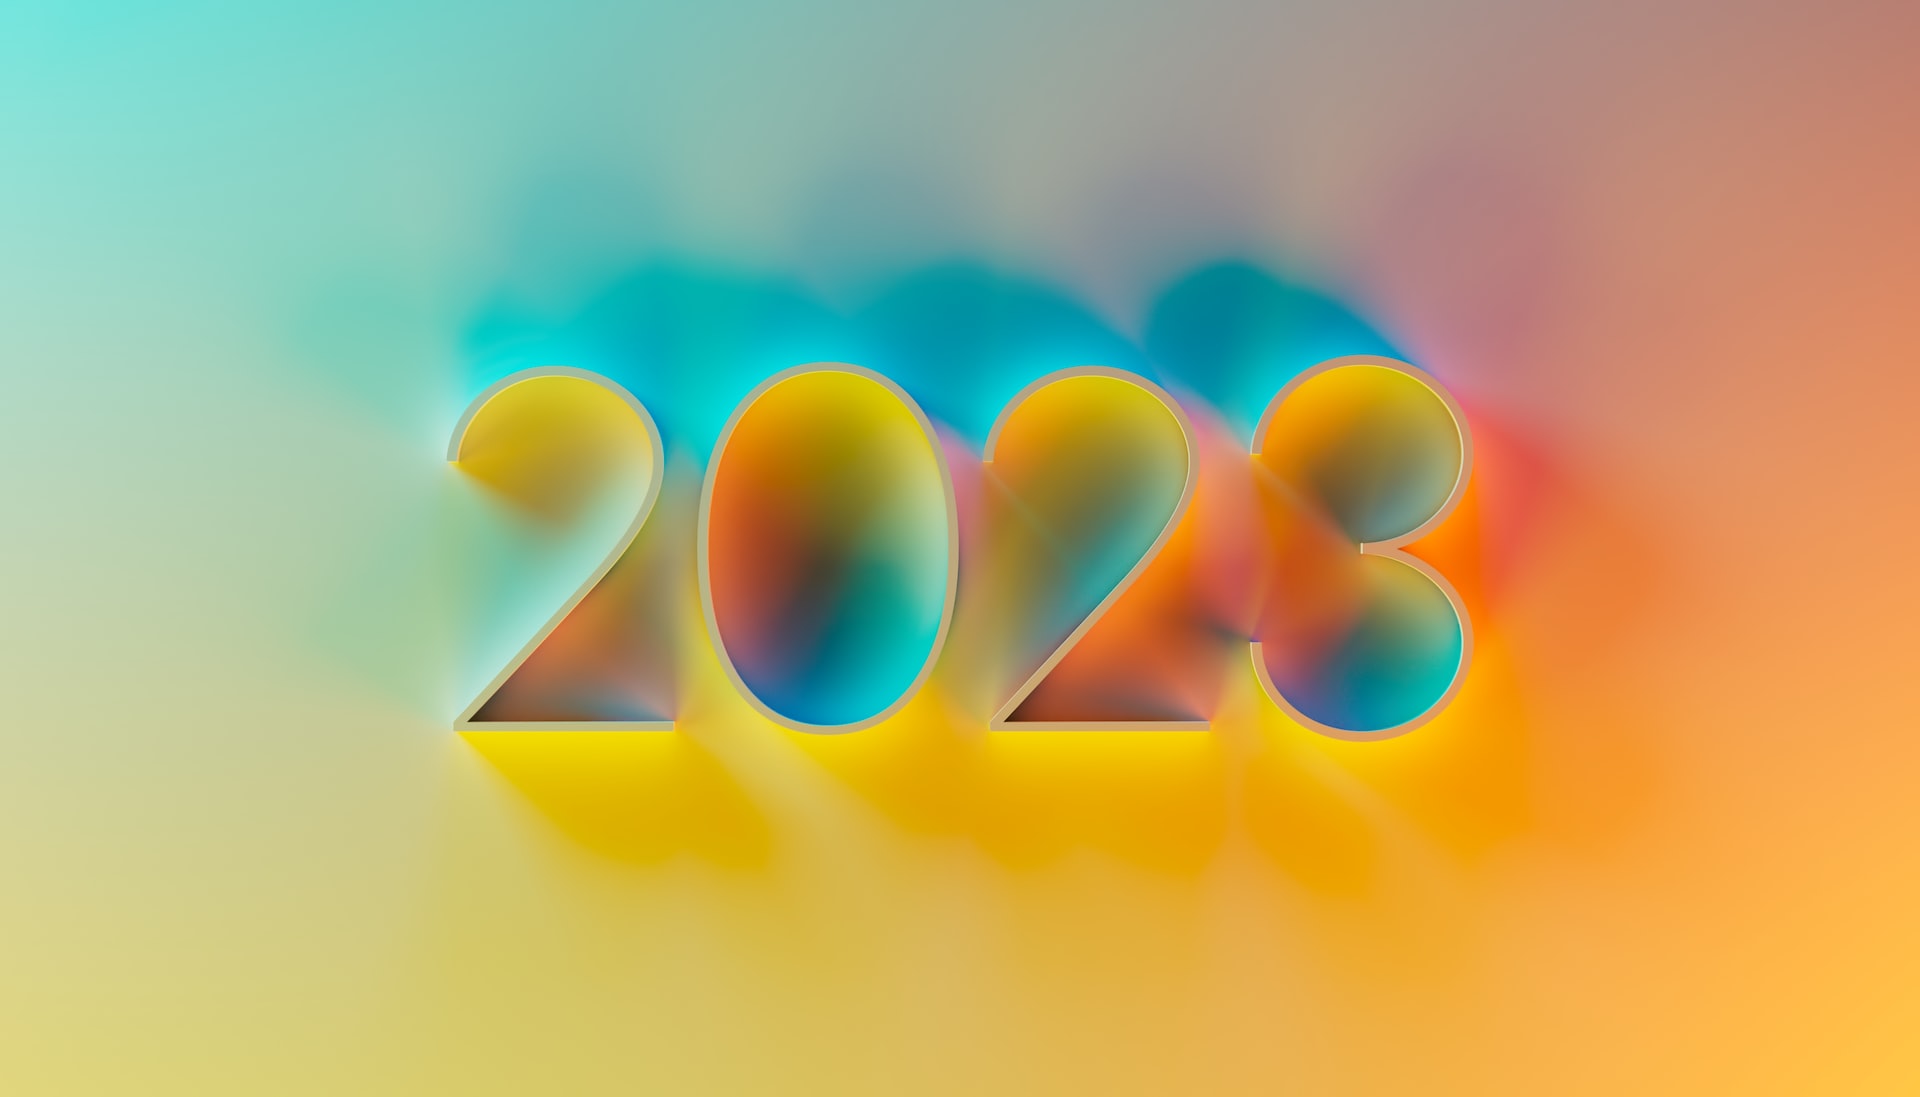 Succumb to doom or seize the opportunity: what will your 2023 be like?